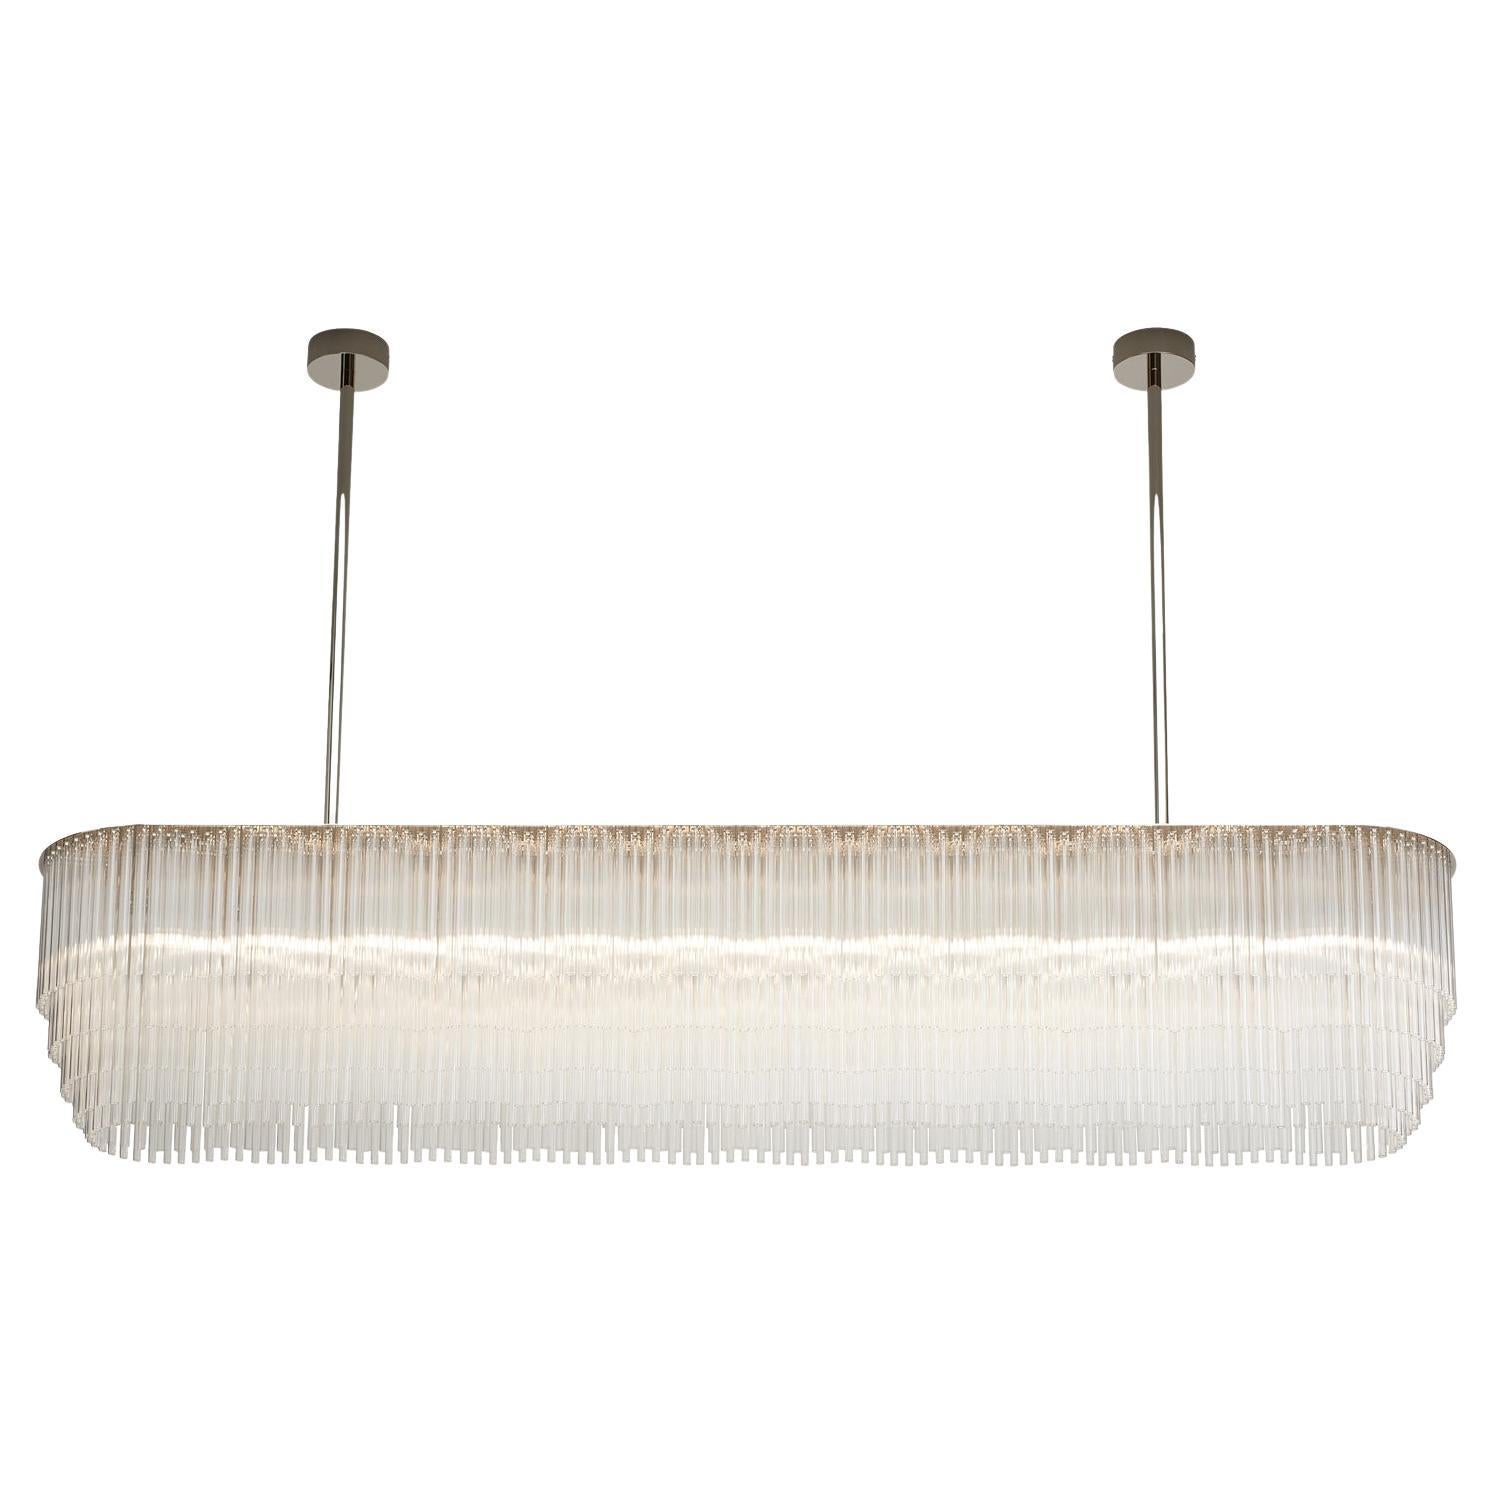 Linear Chandelier 1370mm / 54" in Polished Chrome with Tiered Glass Profile For Sale